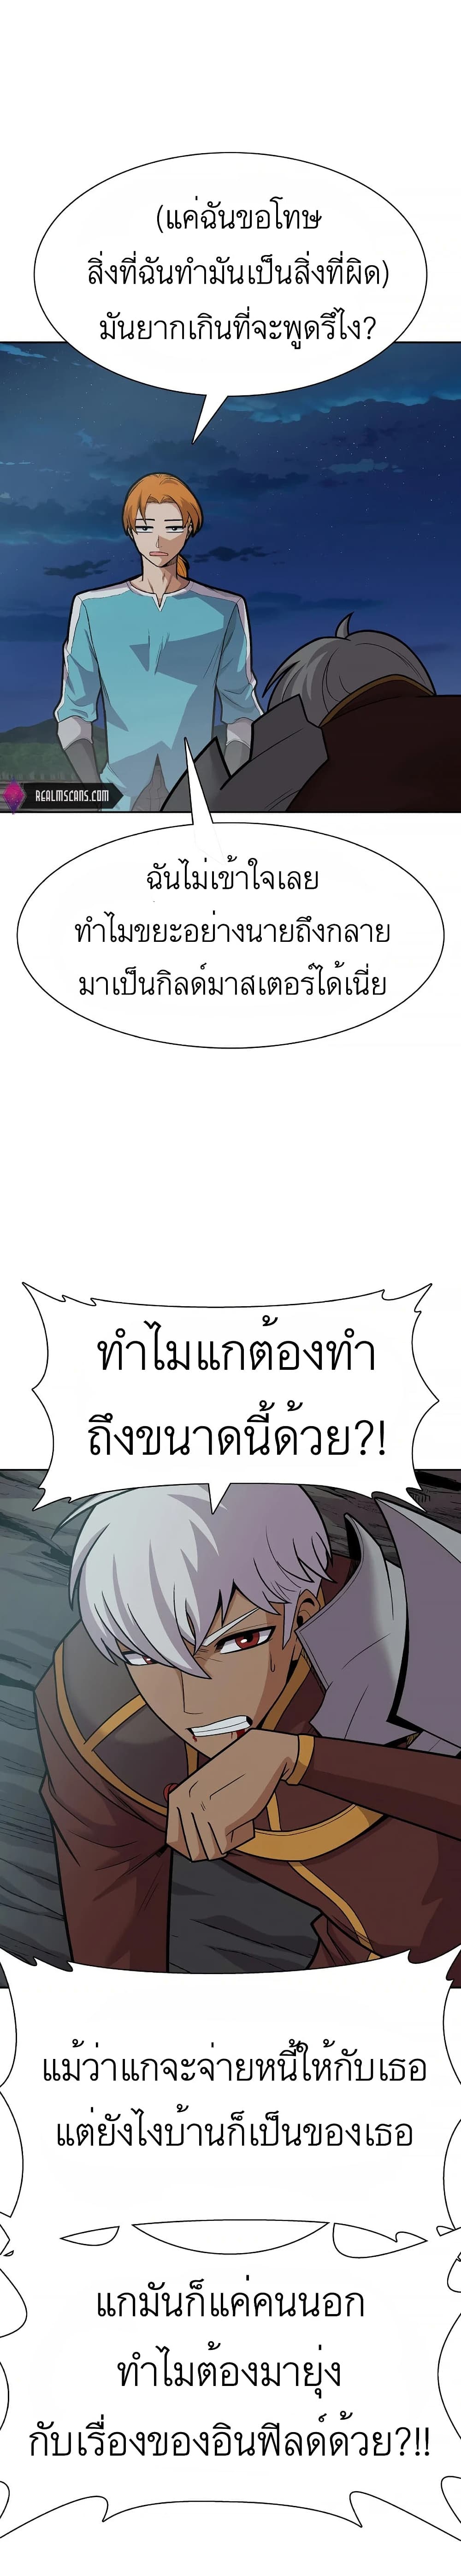 Raising Newbie Heroes In Another World ตอนที่ 16 (28)